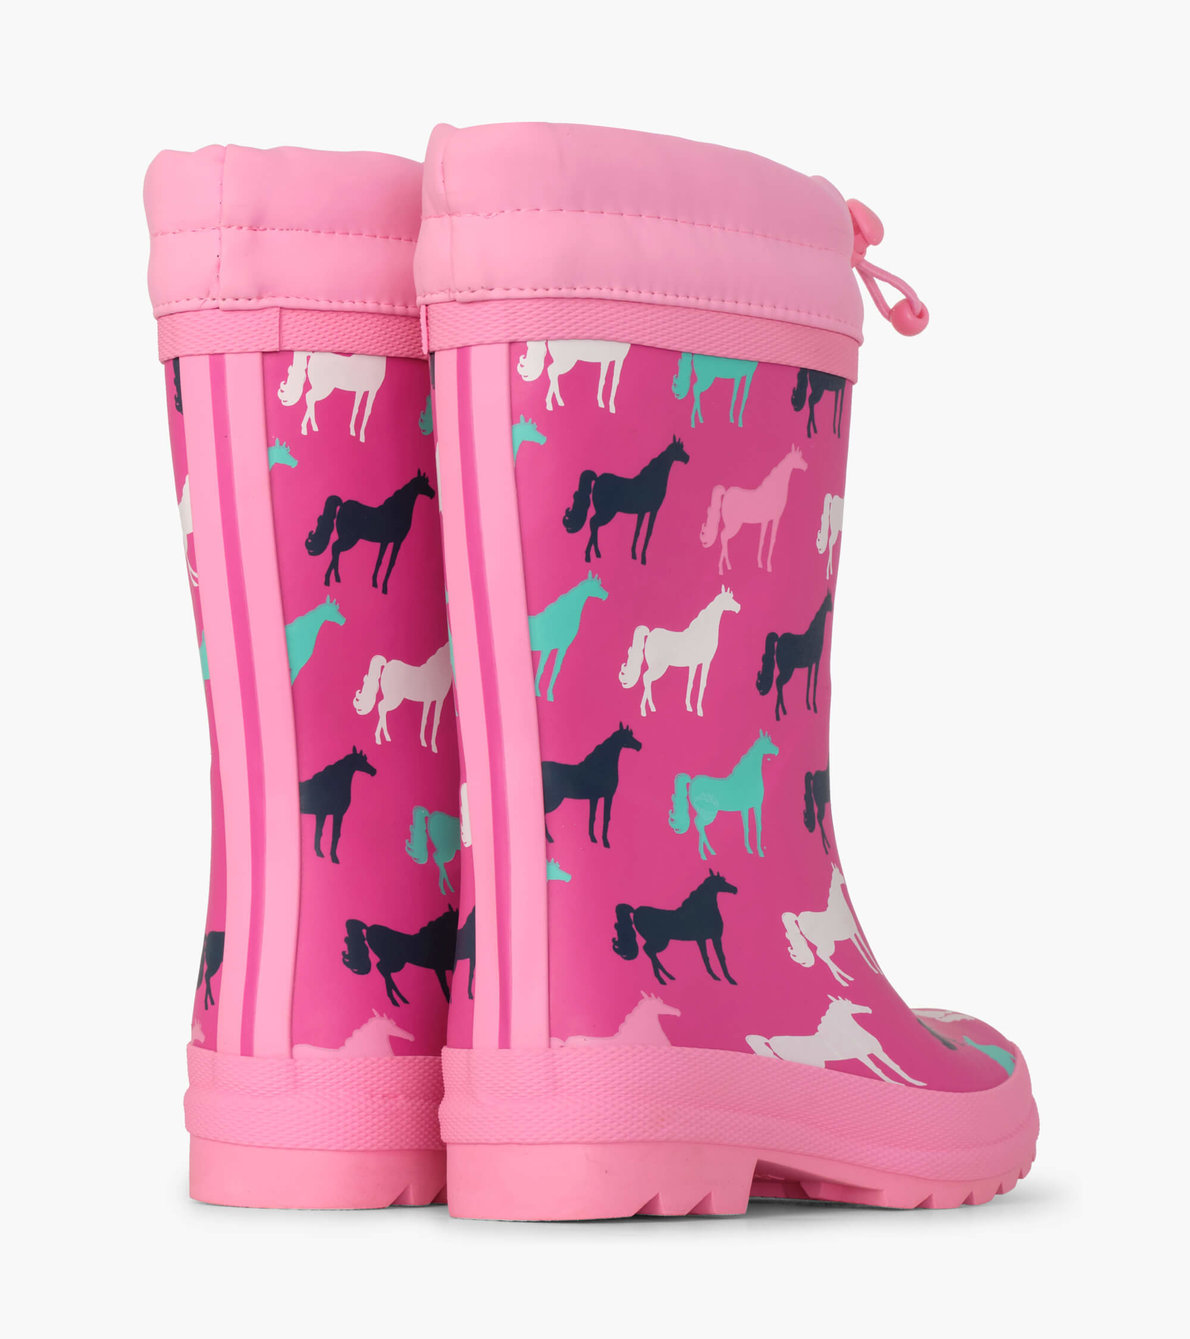 View larger image of Horse Silhouettes Sherpa Lined Rain Boots